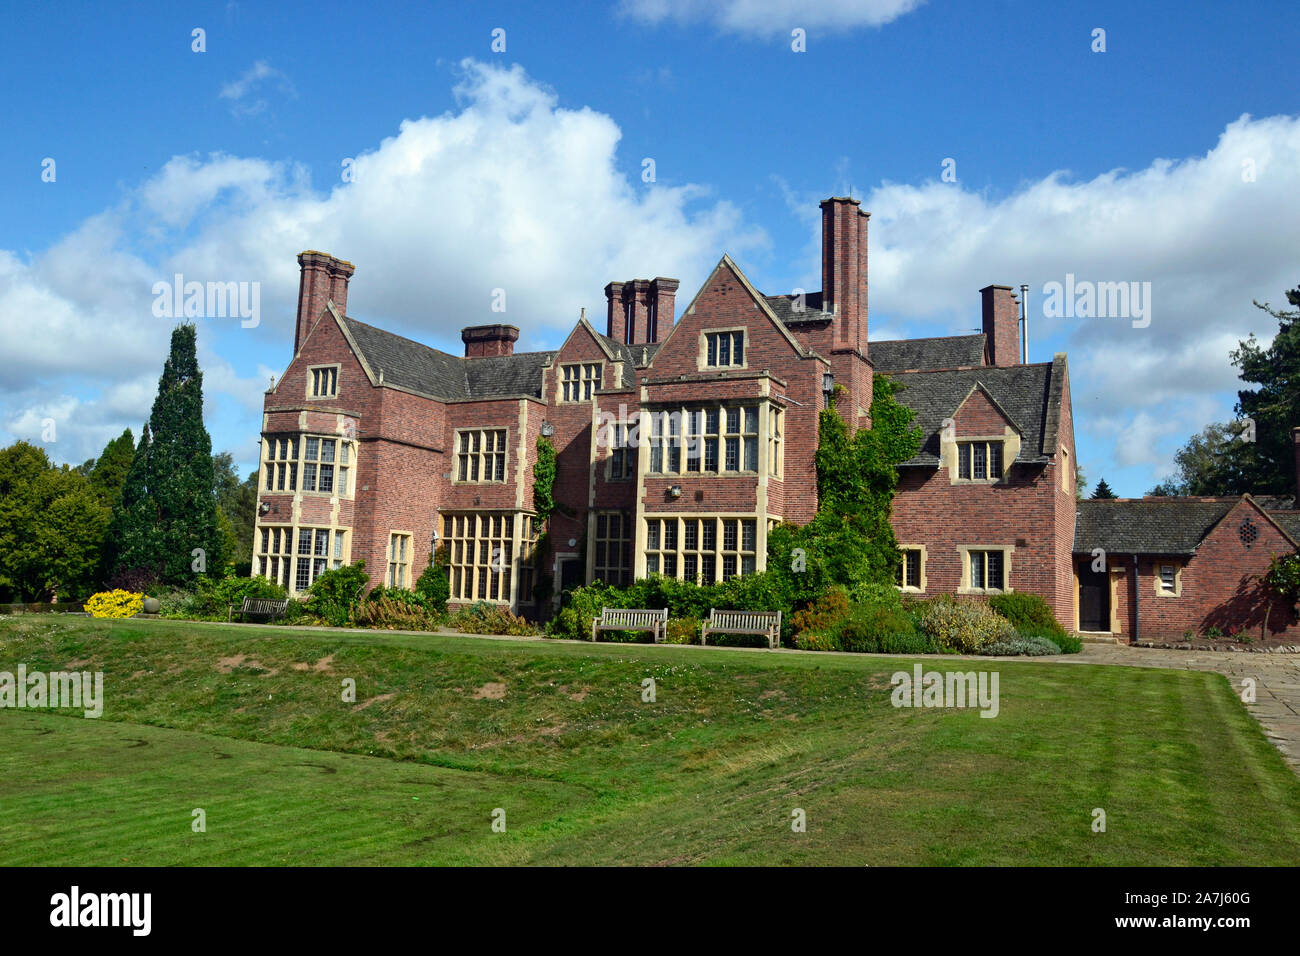 Manor House In The University Of Leicester Botanic Garden